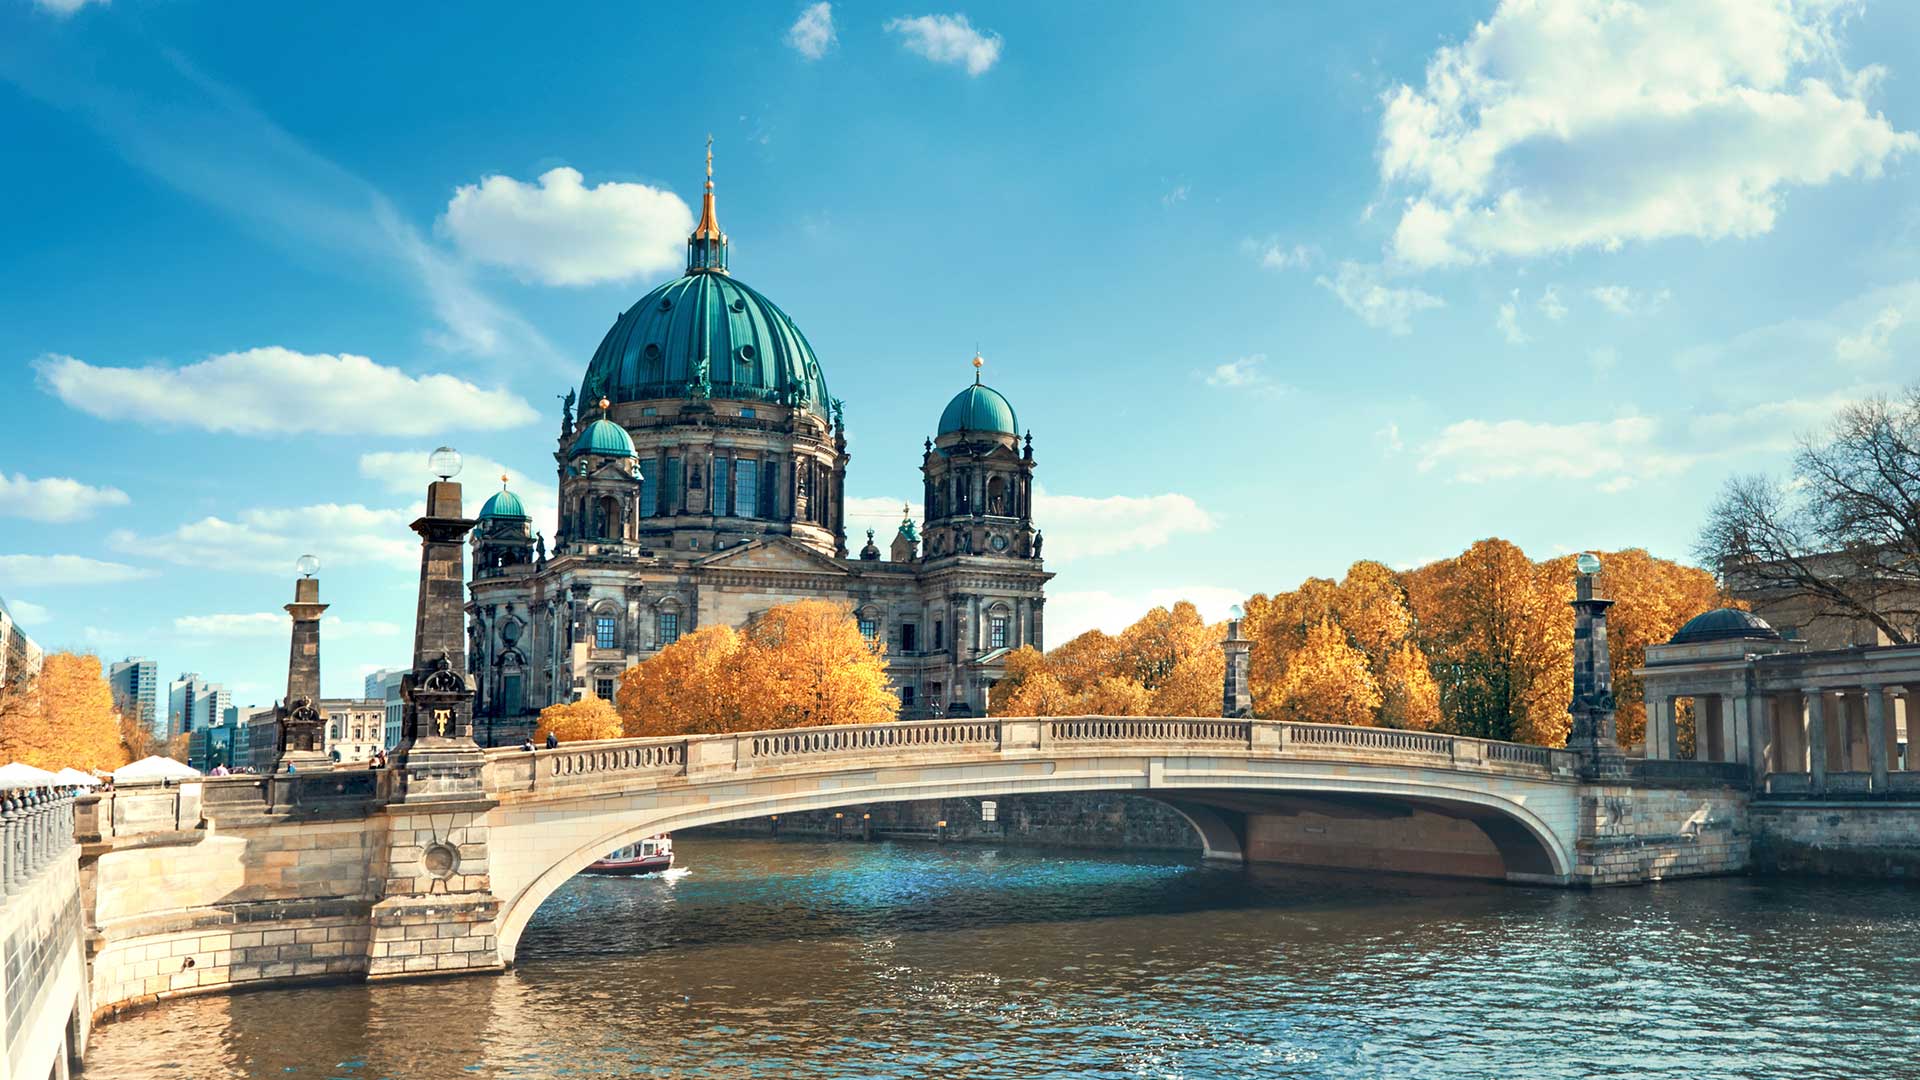 Berlin-Cathedral-with-a-bridge-over-Spree-river-in-Autumn-1920x1080